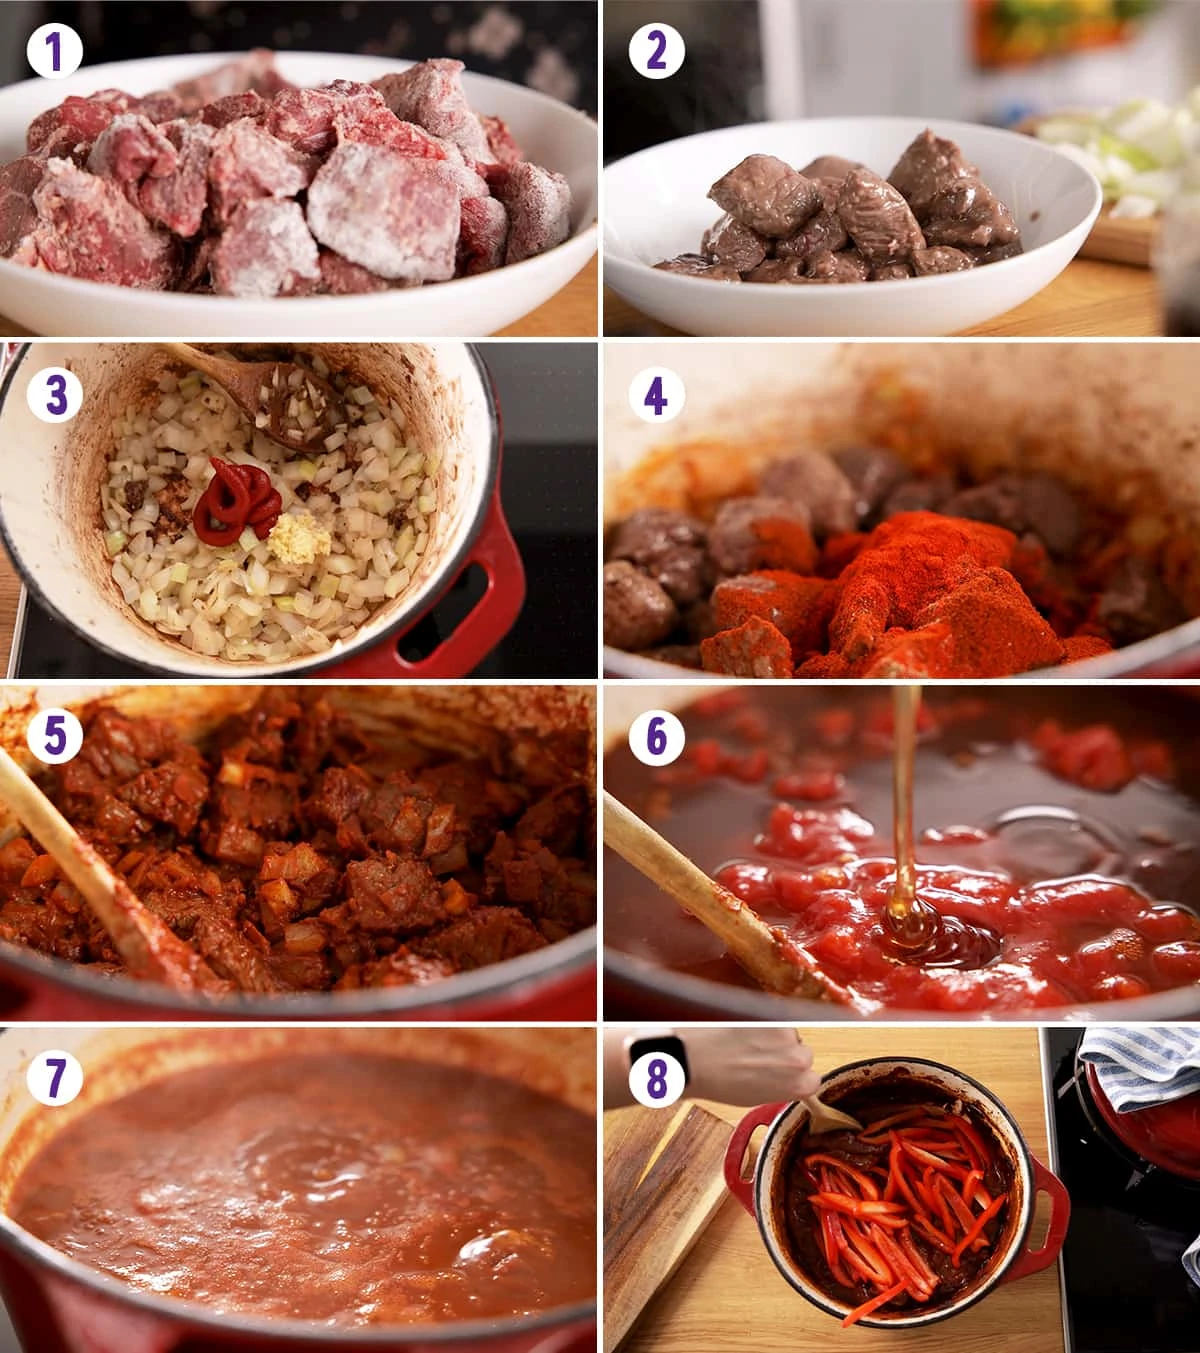 8 image collage showing how to make beef goulash